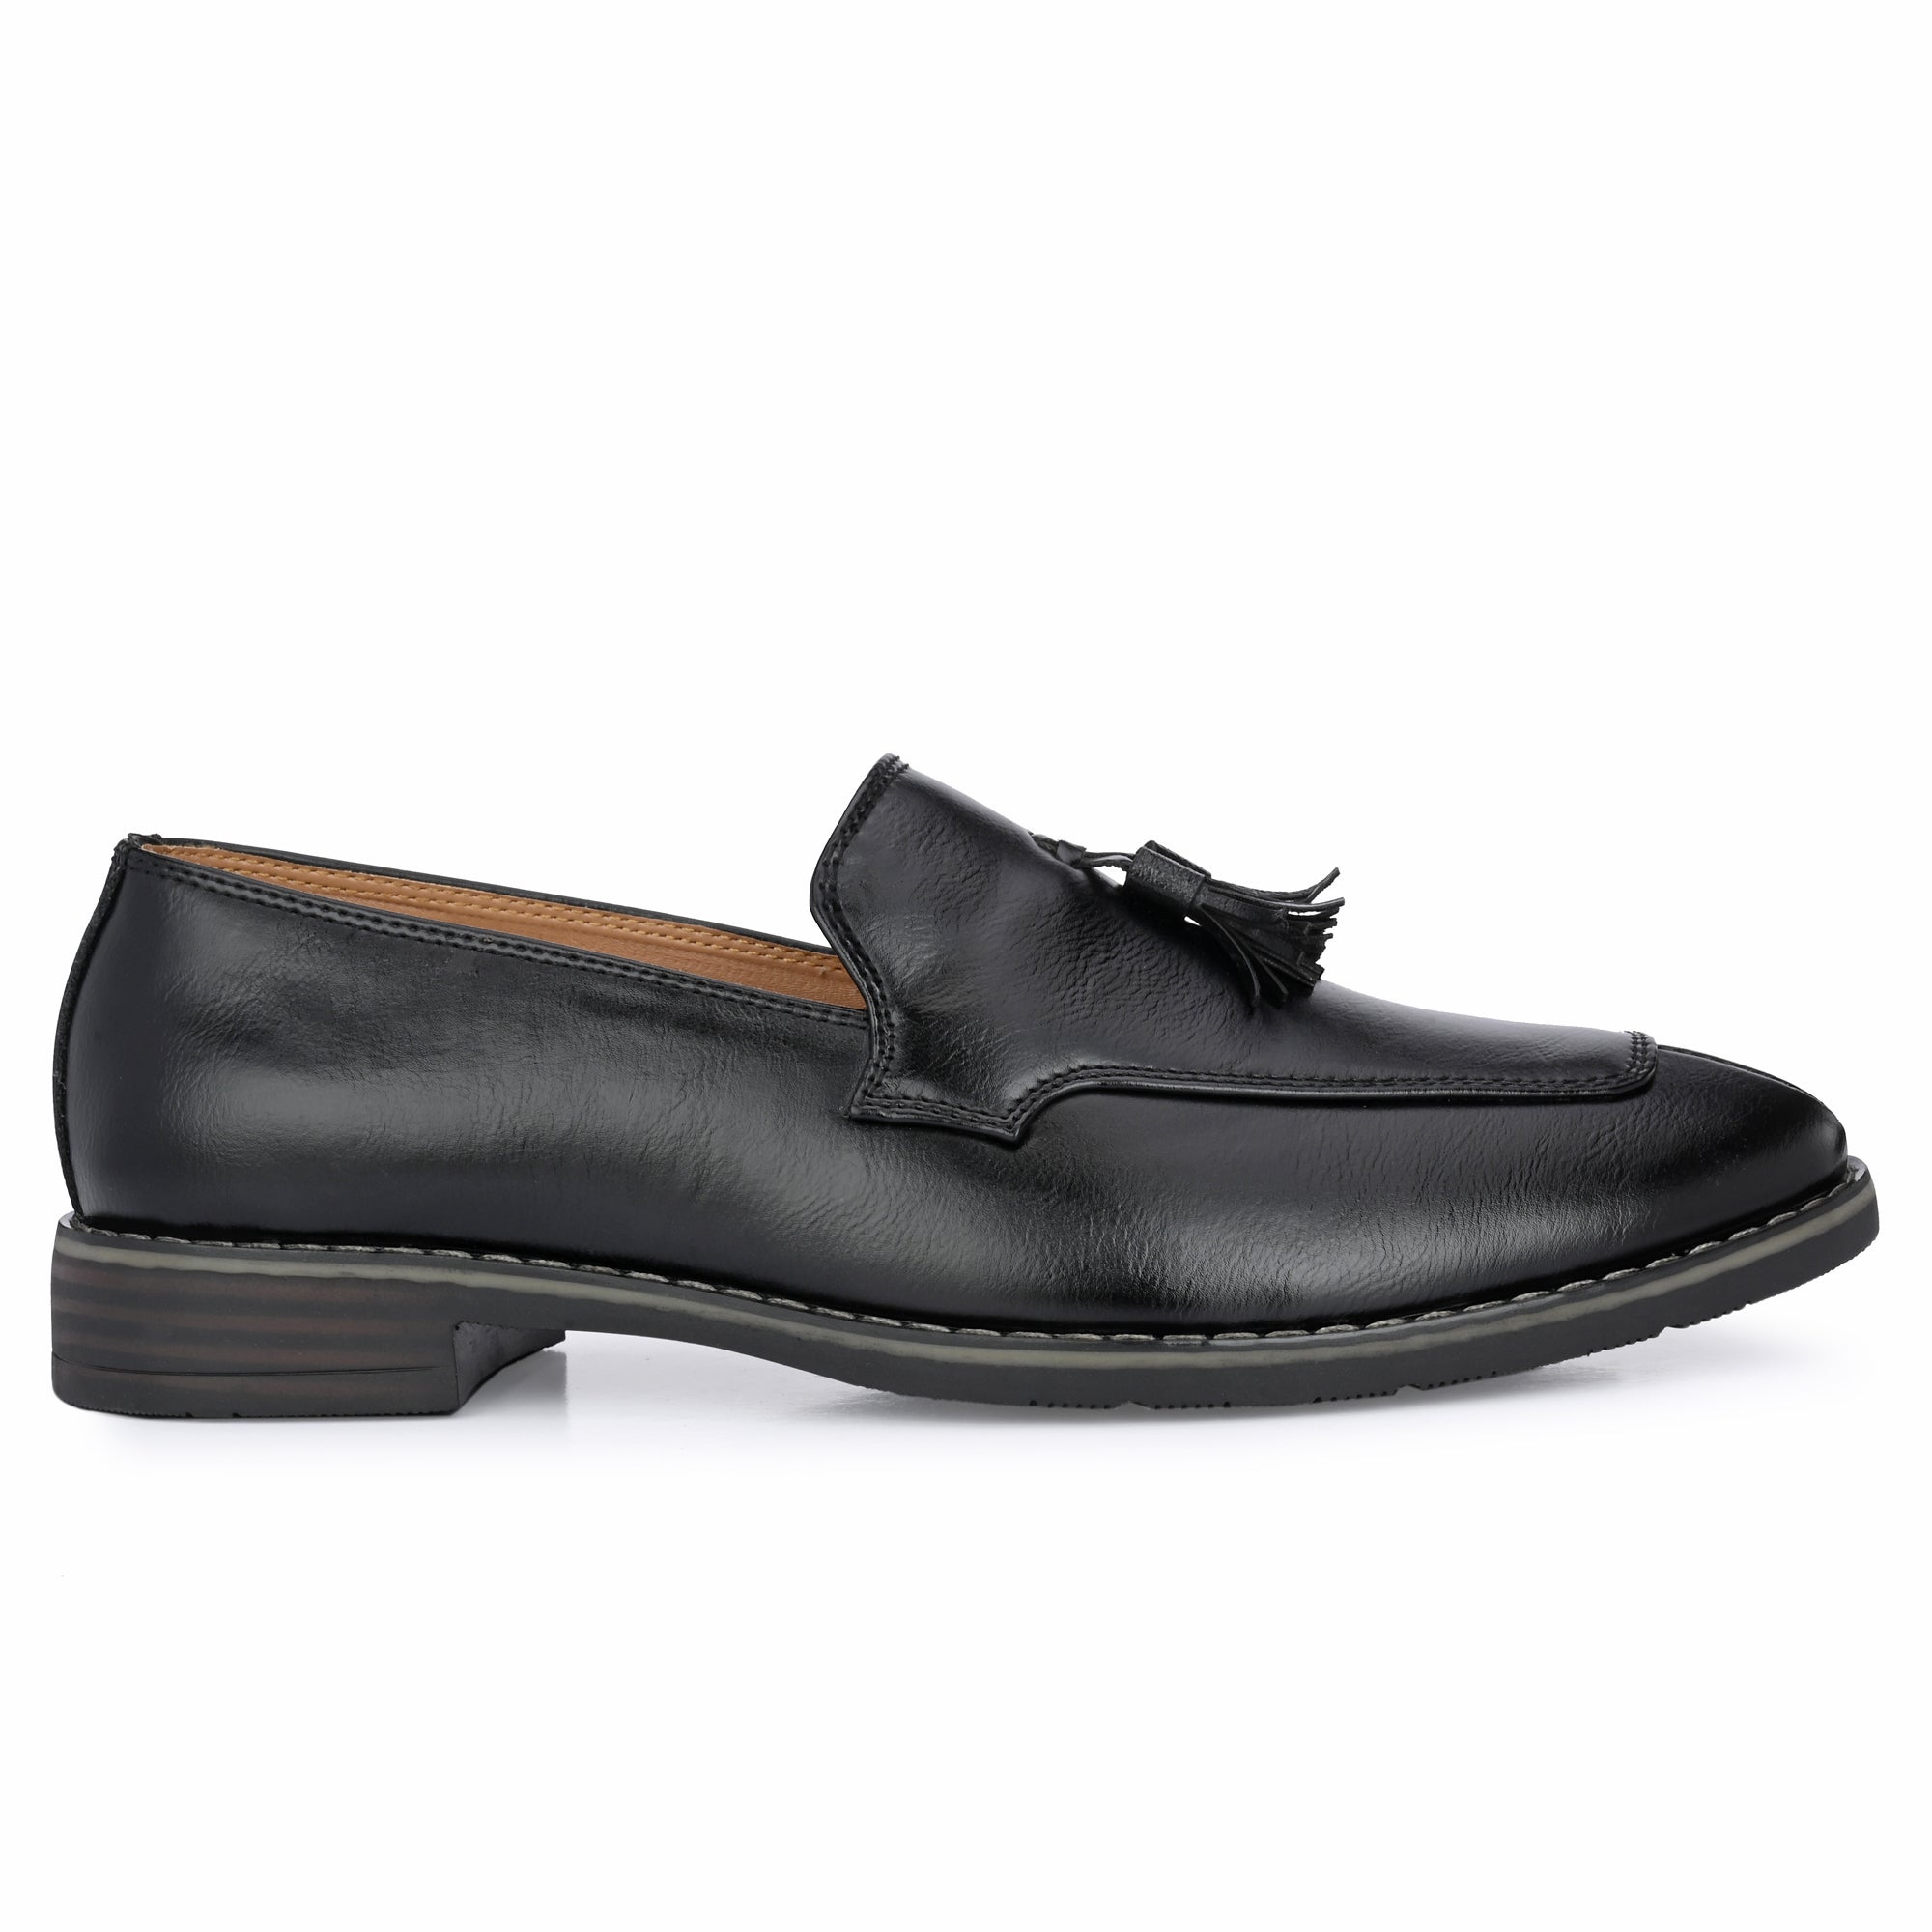 black-loafers-attitudist-shoes-for-men-with-tassel-sp13a